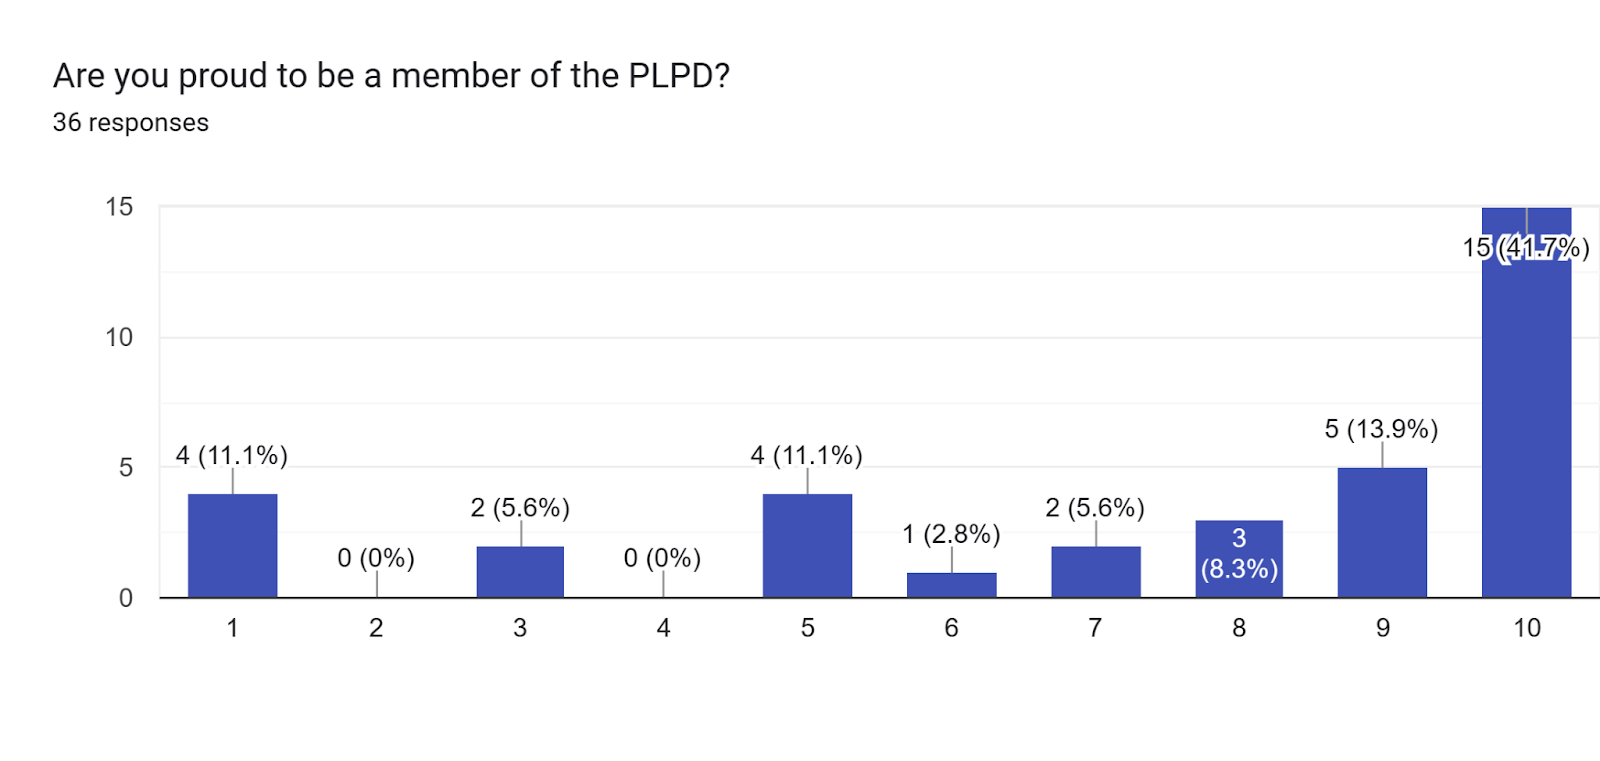 Forms response chart. Question title: Are you proud to be a member of the PLPD?. Number of responses: 36 responses.